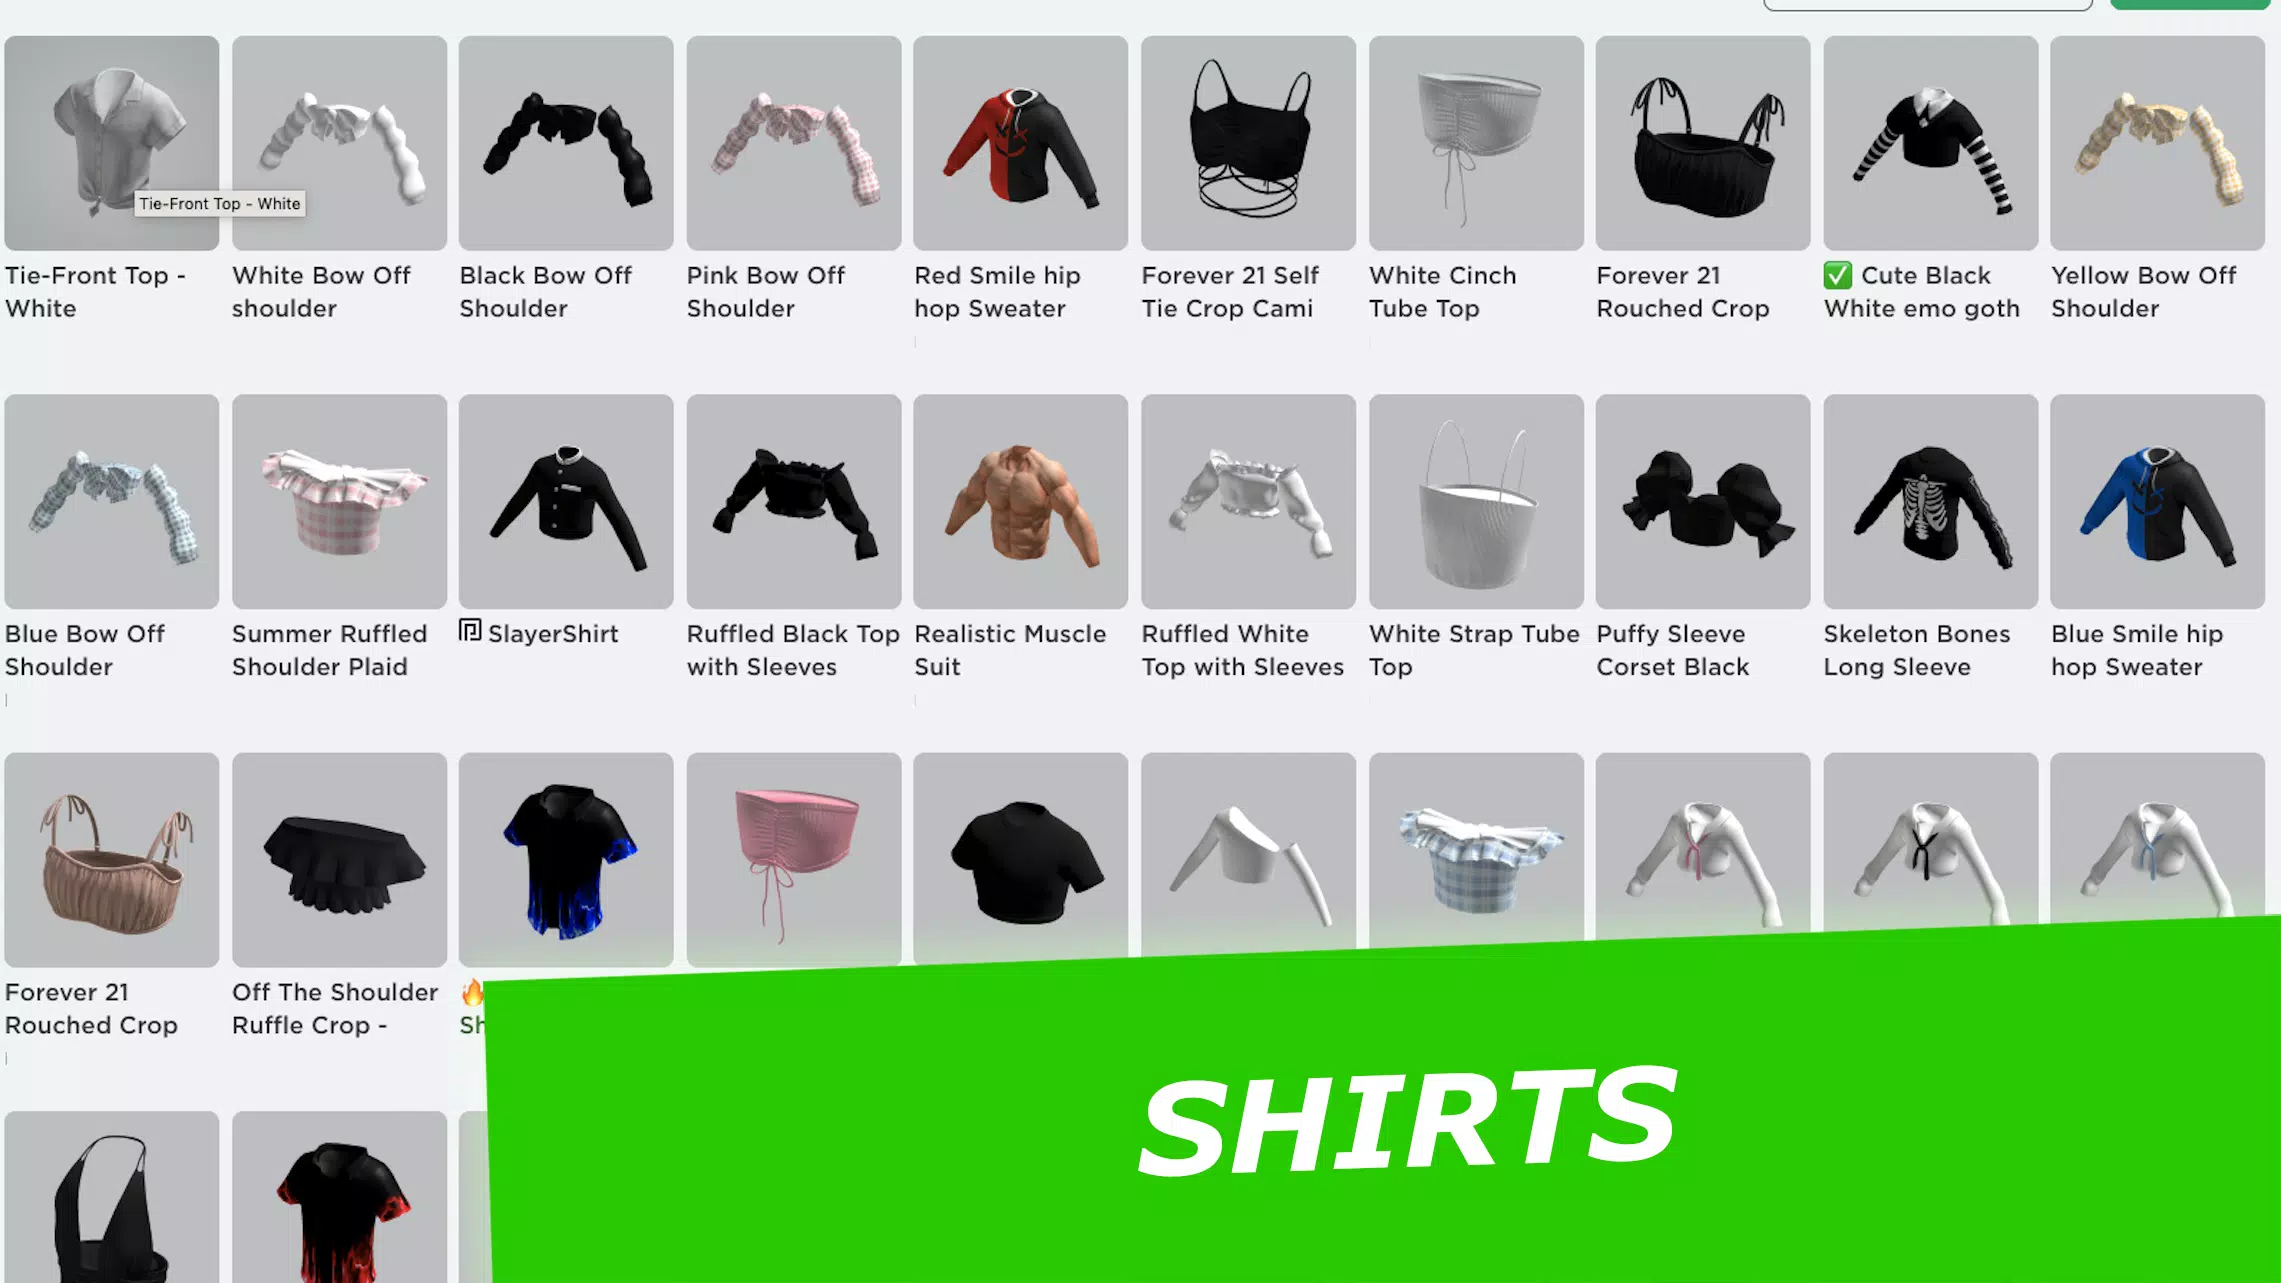 Skins for Roblox Clothing APK (Android App) - Free Download